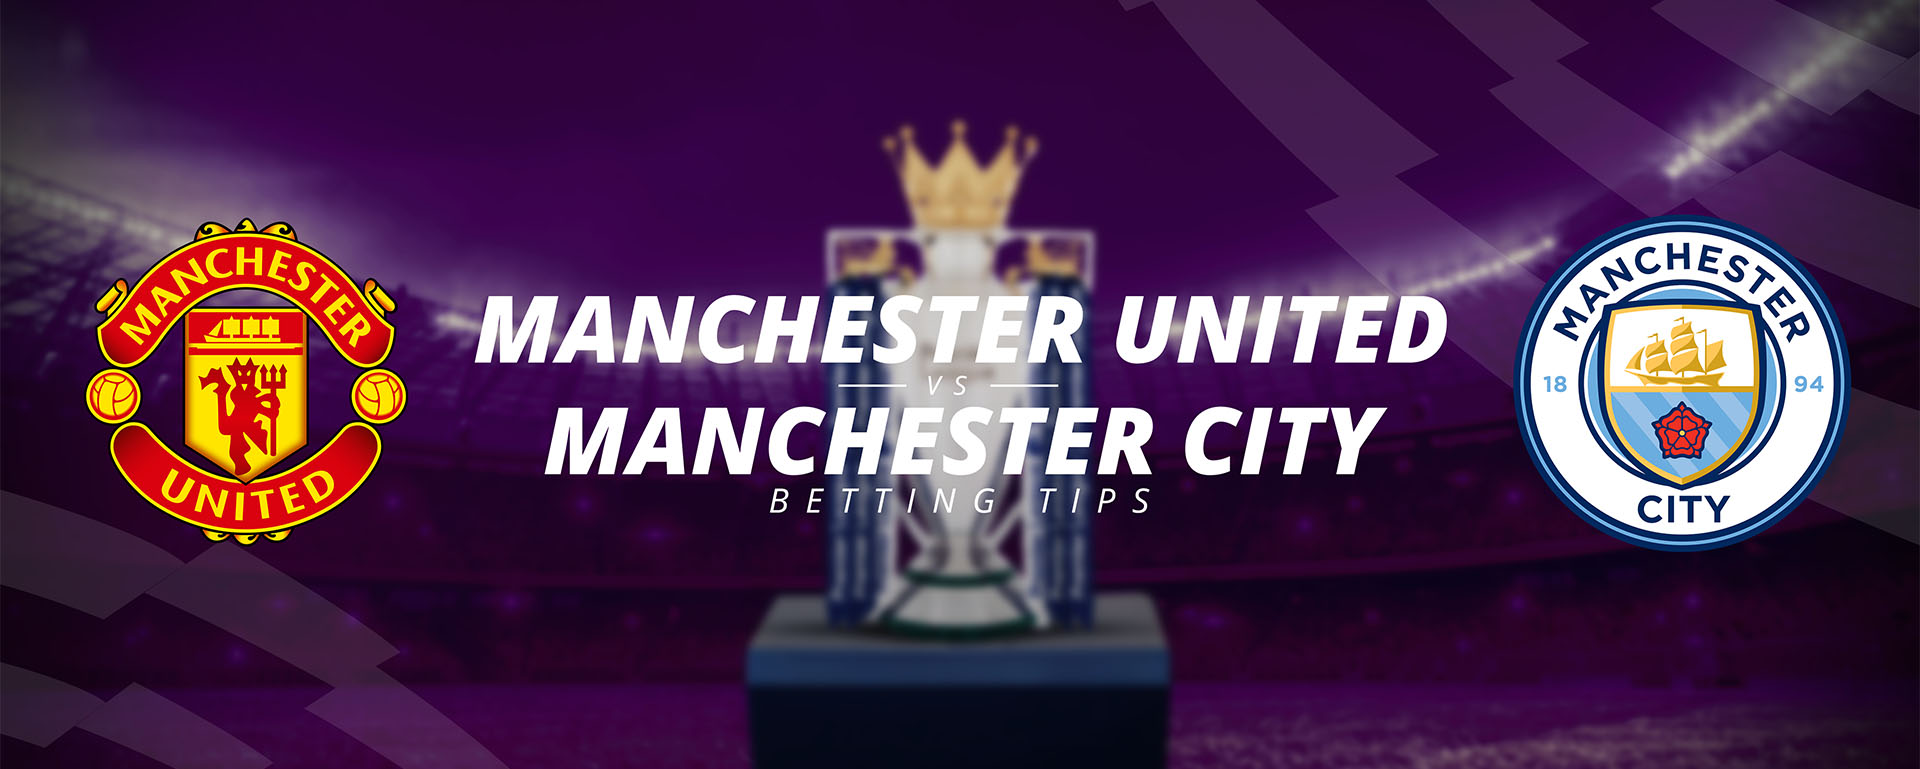 MANCHESTER UNITED – MANCHESTER CITY